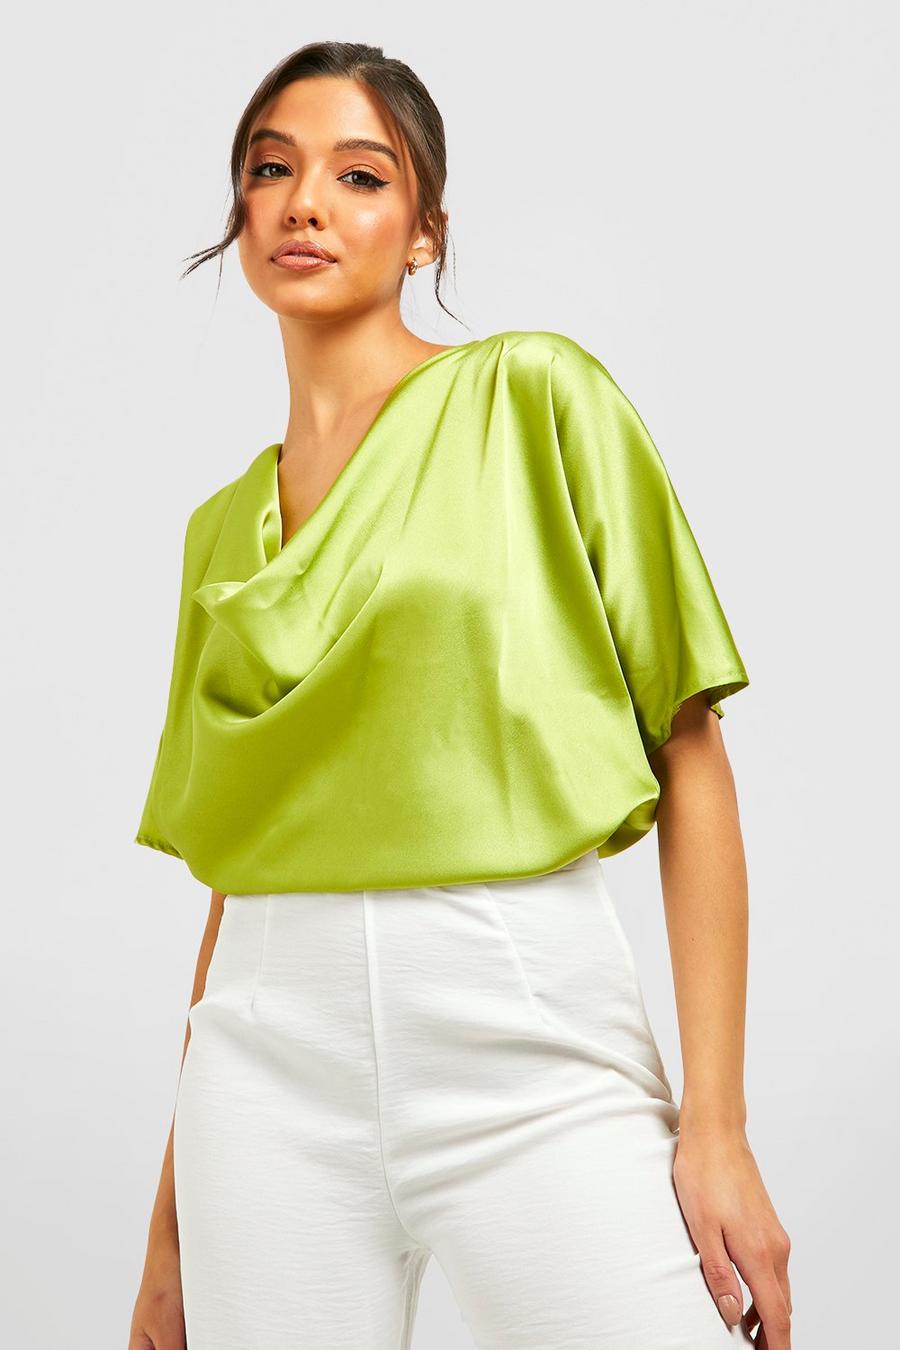 Chartreuse yellow Satin Cowl Neck Short Sleeve Blouse